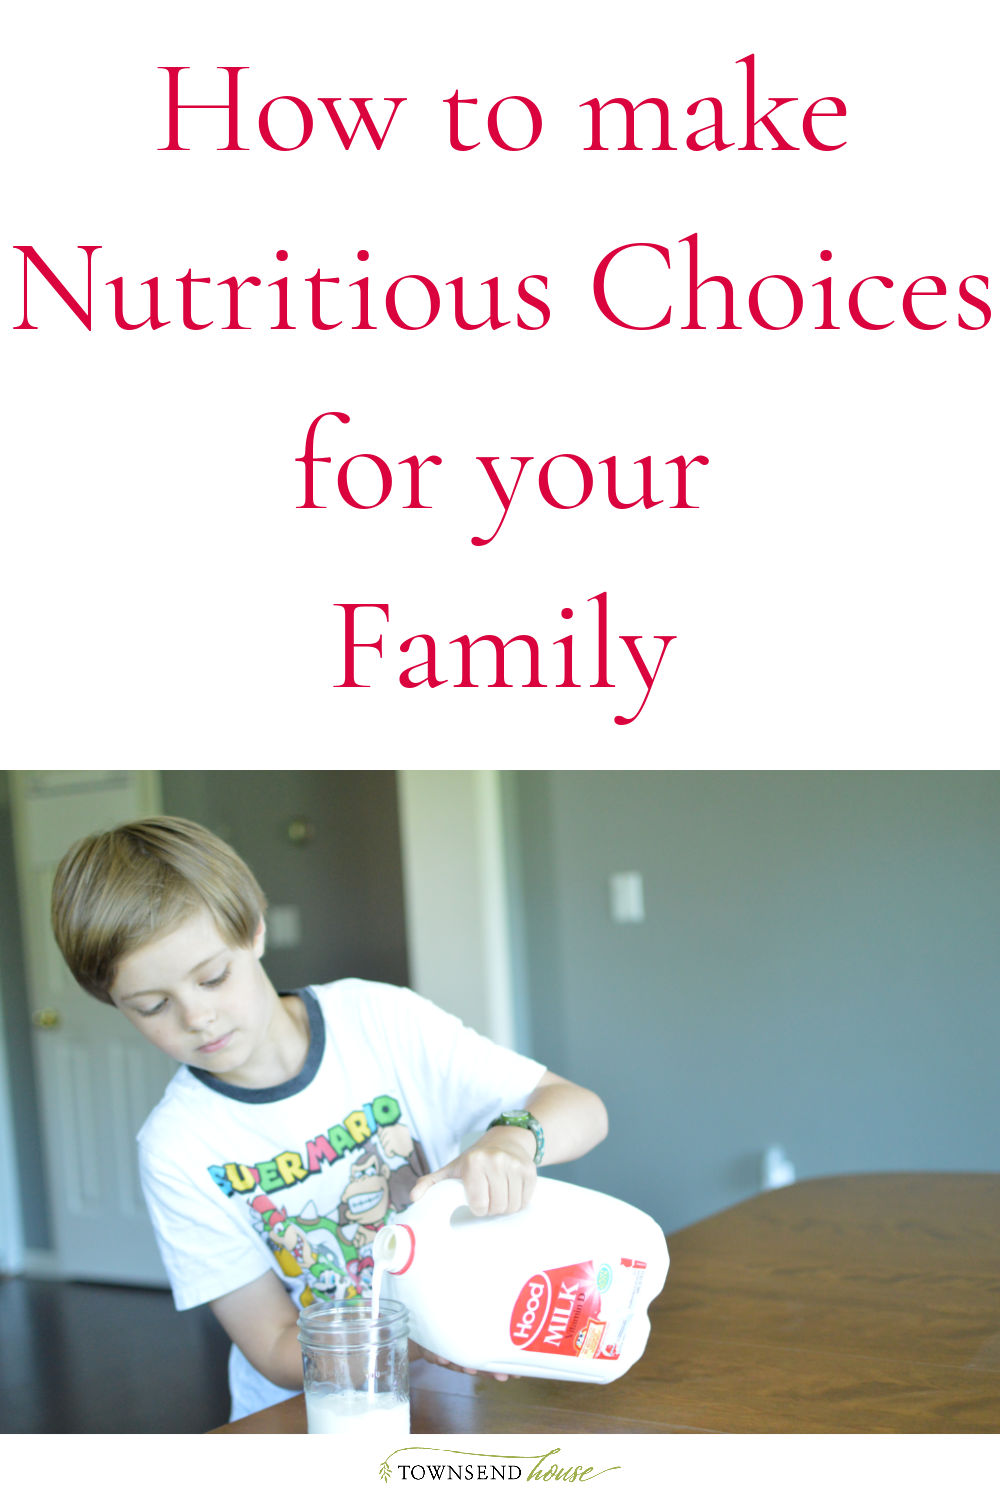 How to make Nutritious Choices for your Family